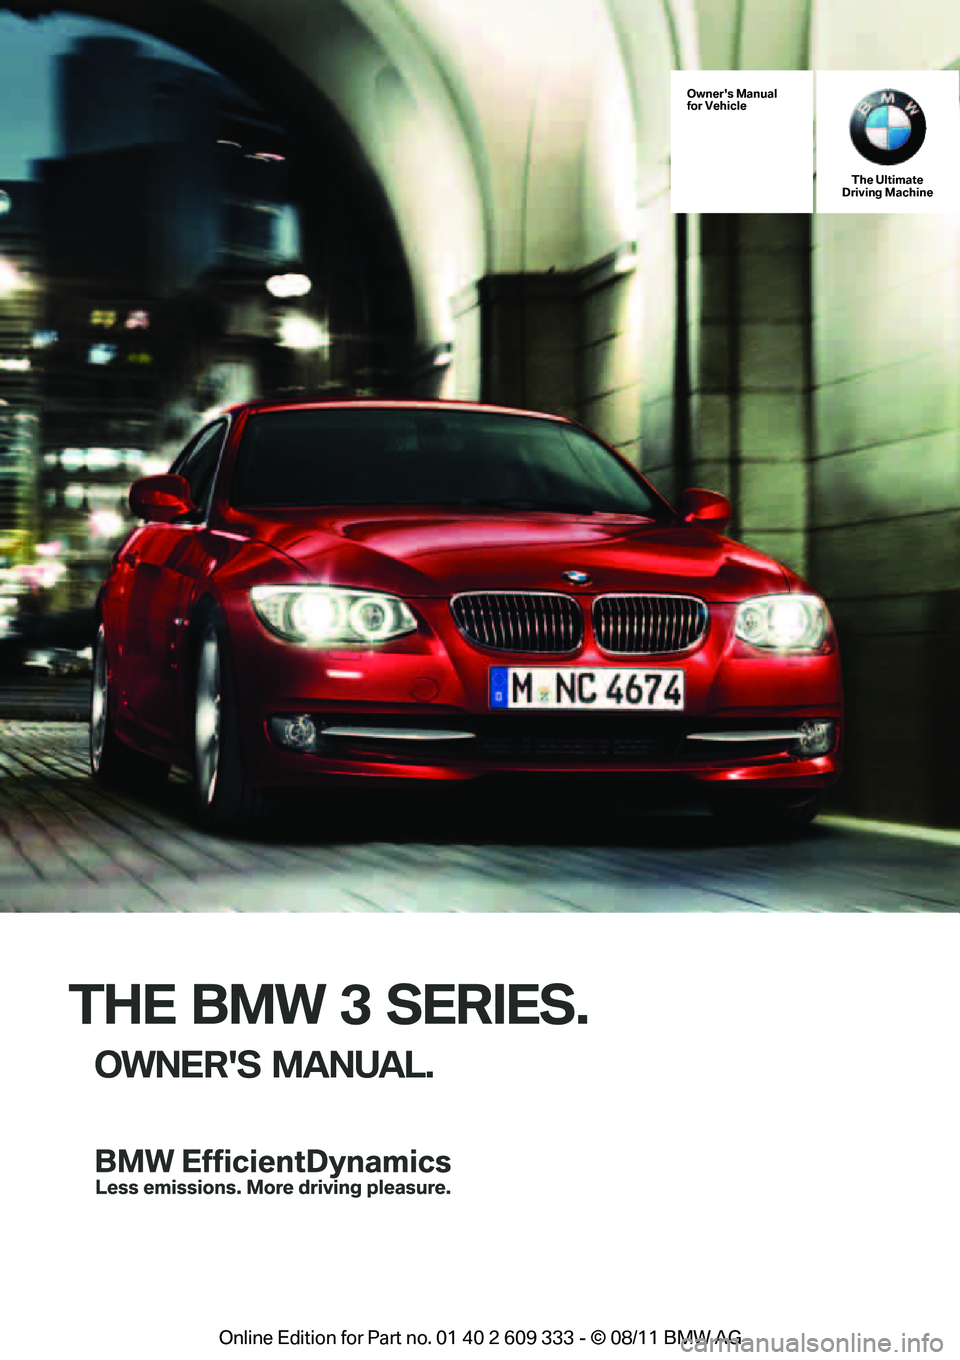 BMW 328I XDRIVE COUPE 2012  Owners Manual THE BMW 3 SERIES.
OWNERS MANUAL.
Owners Manual
for VehicleThe Ultimate
Driving Machine
Online  Edition  for Part  no. 01 40 2 609  333 - \251  08/11  BMW AG  